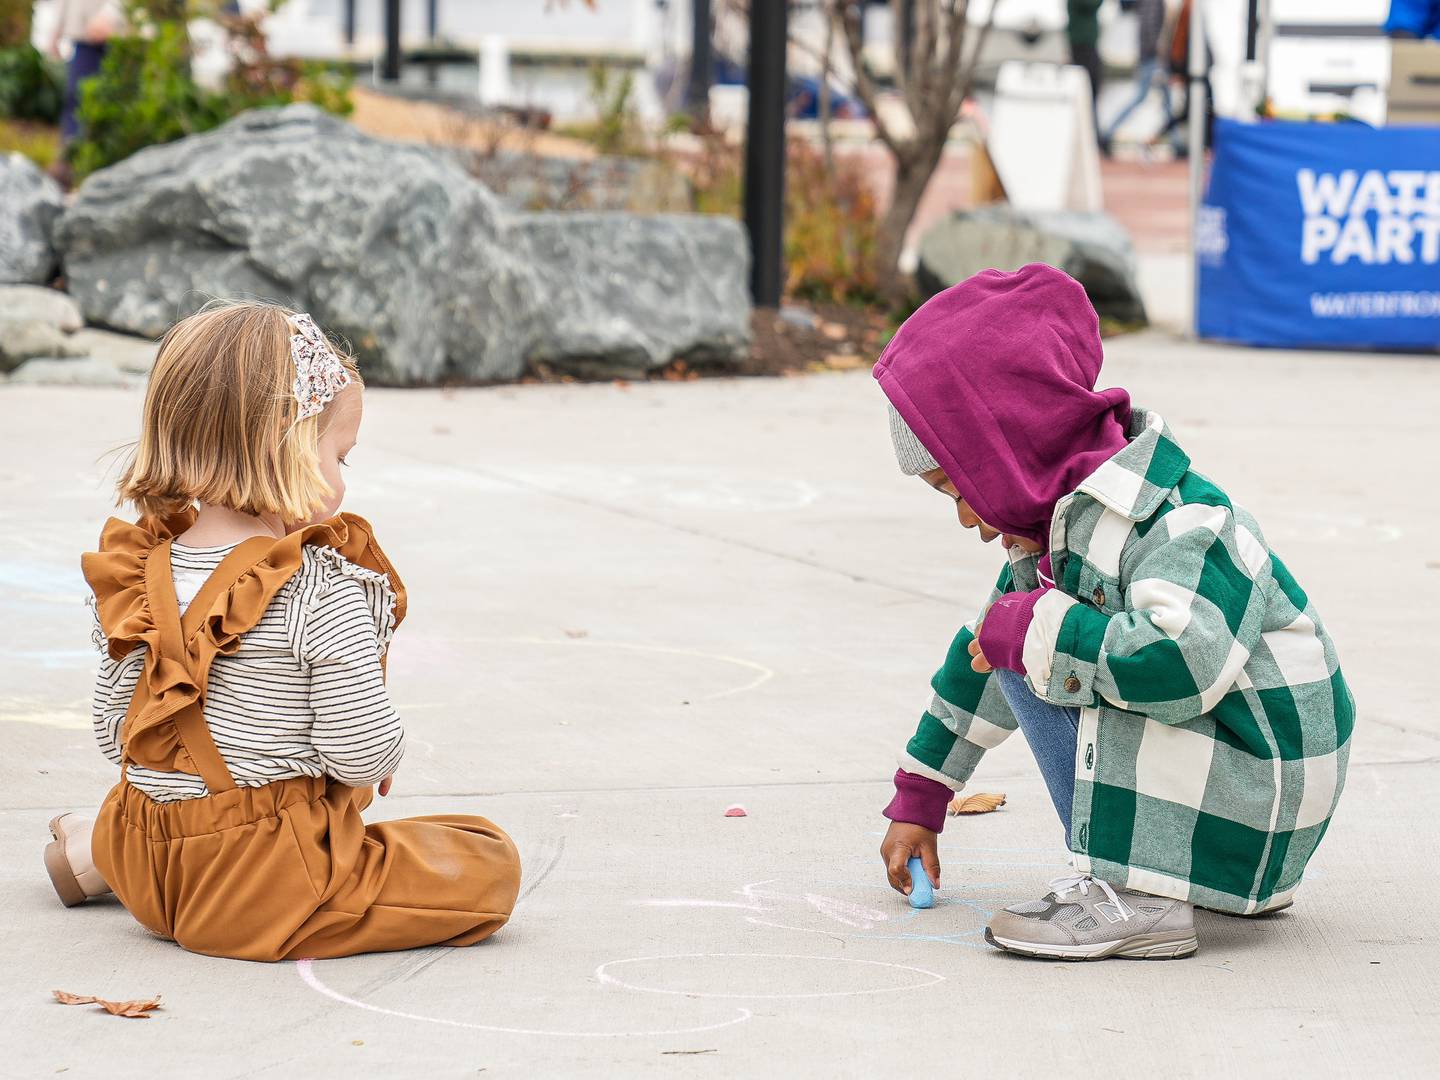 From left, Lottie Cunningham (3.5), and Maddox Carter (3) attempt to keep one another company as they play with the sidewalk chalk, courtesy of the Harbor Harvest Festival.